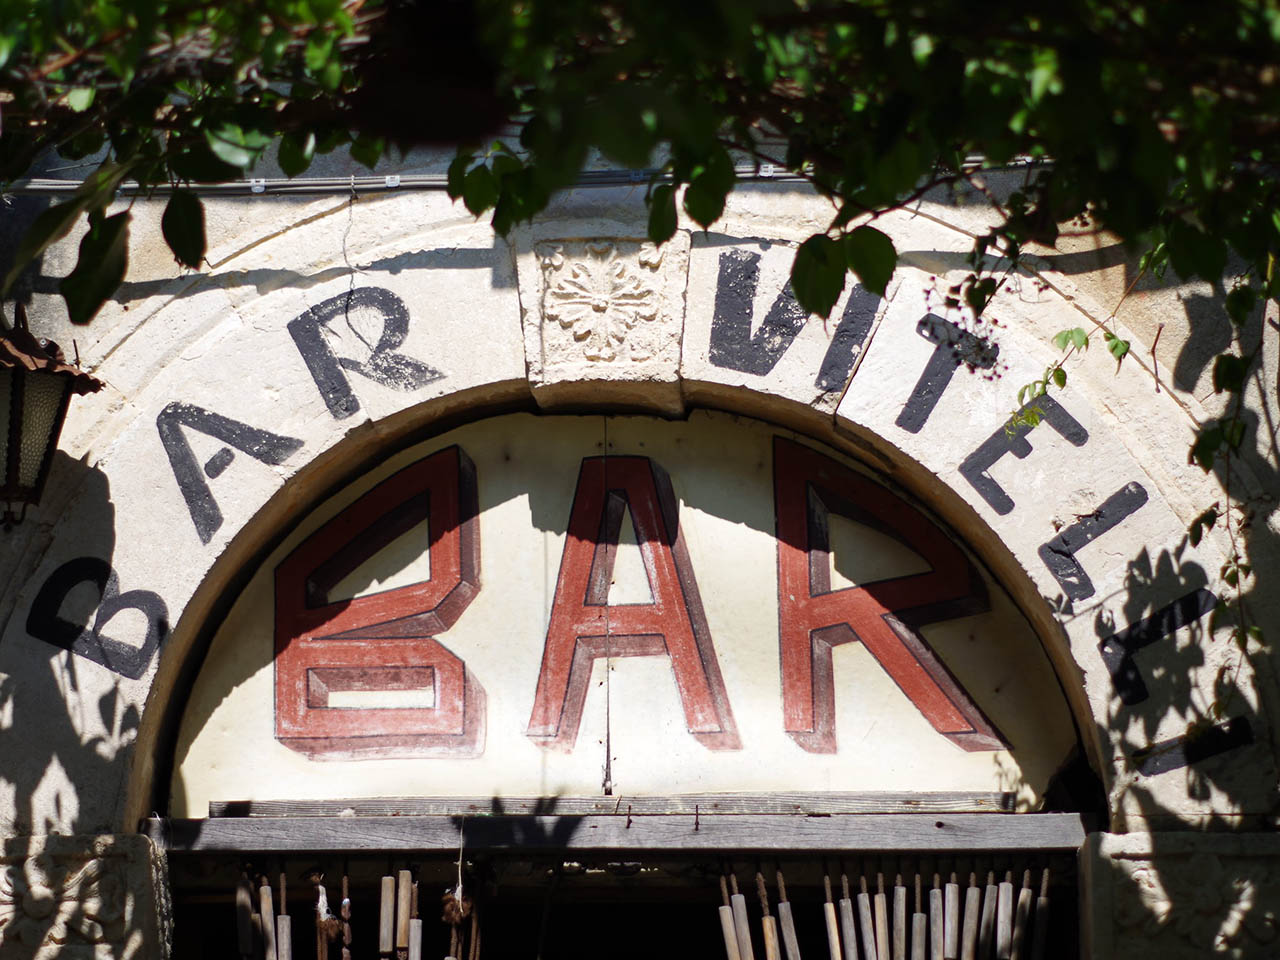 sign of Bar Vitelli in Savoca, where scenes from The Godfather were filmed